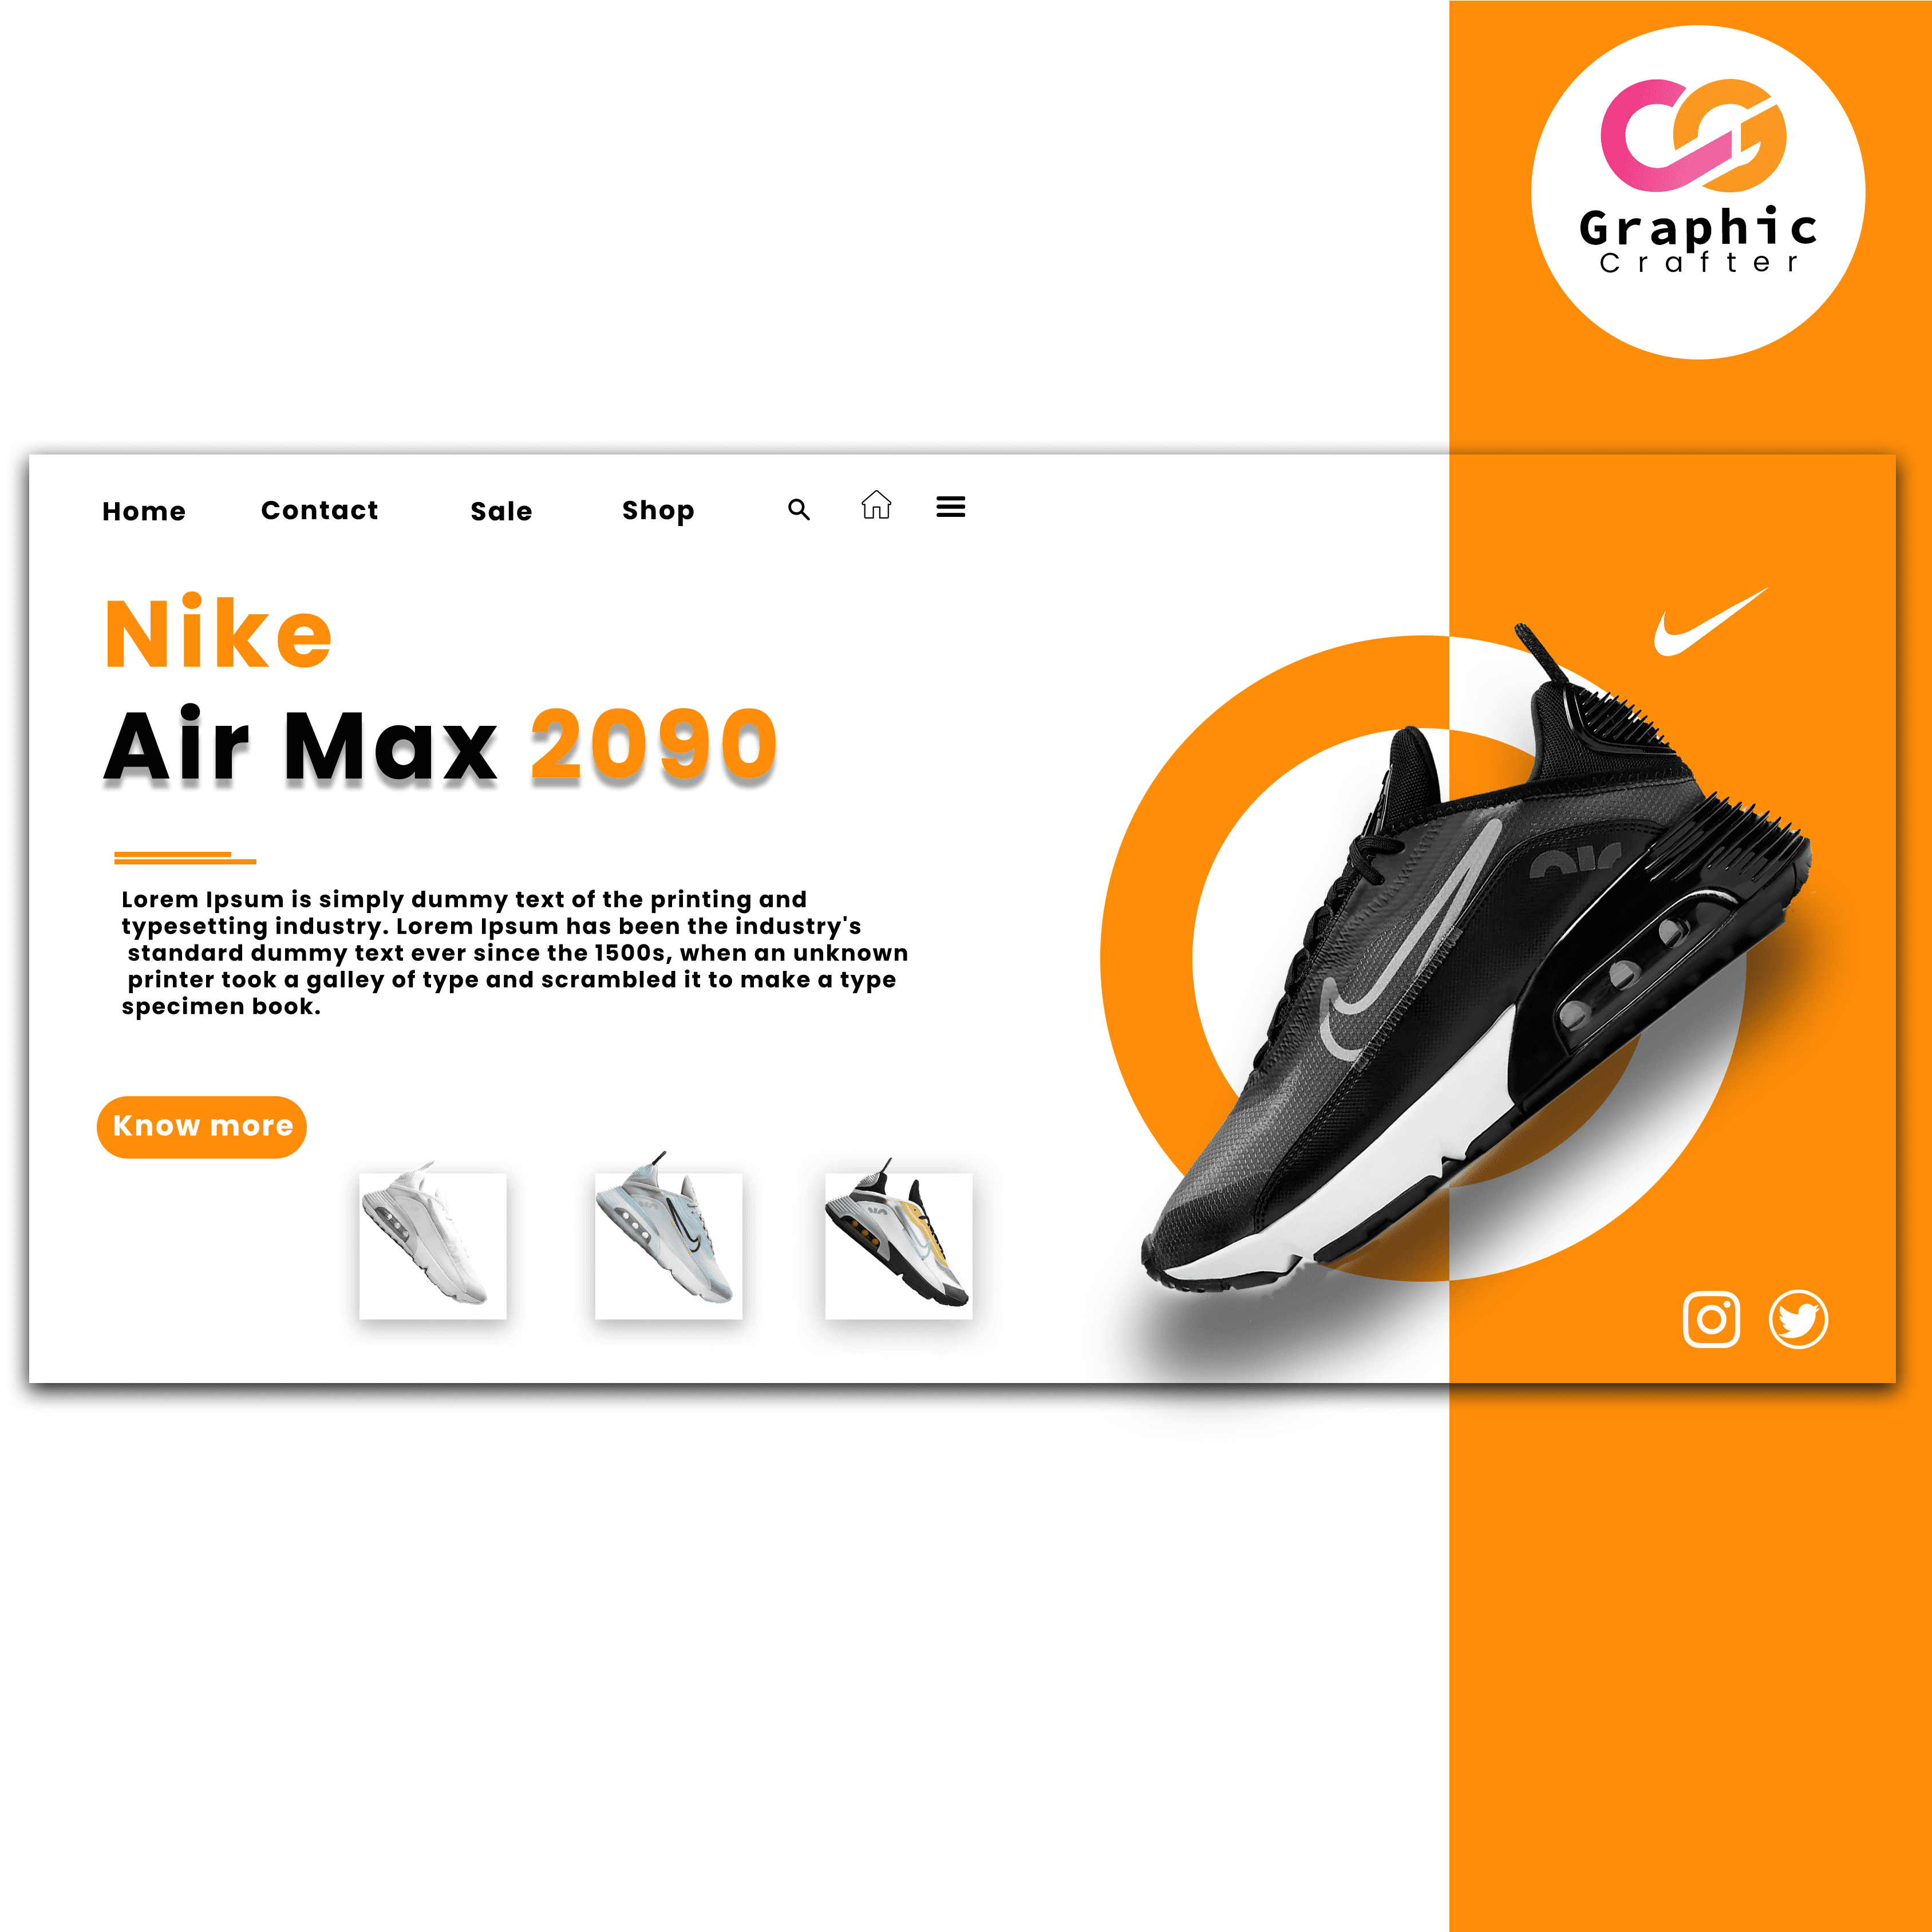 the ui design for your shoes product preview image.